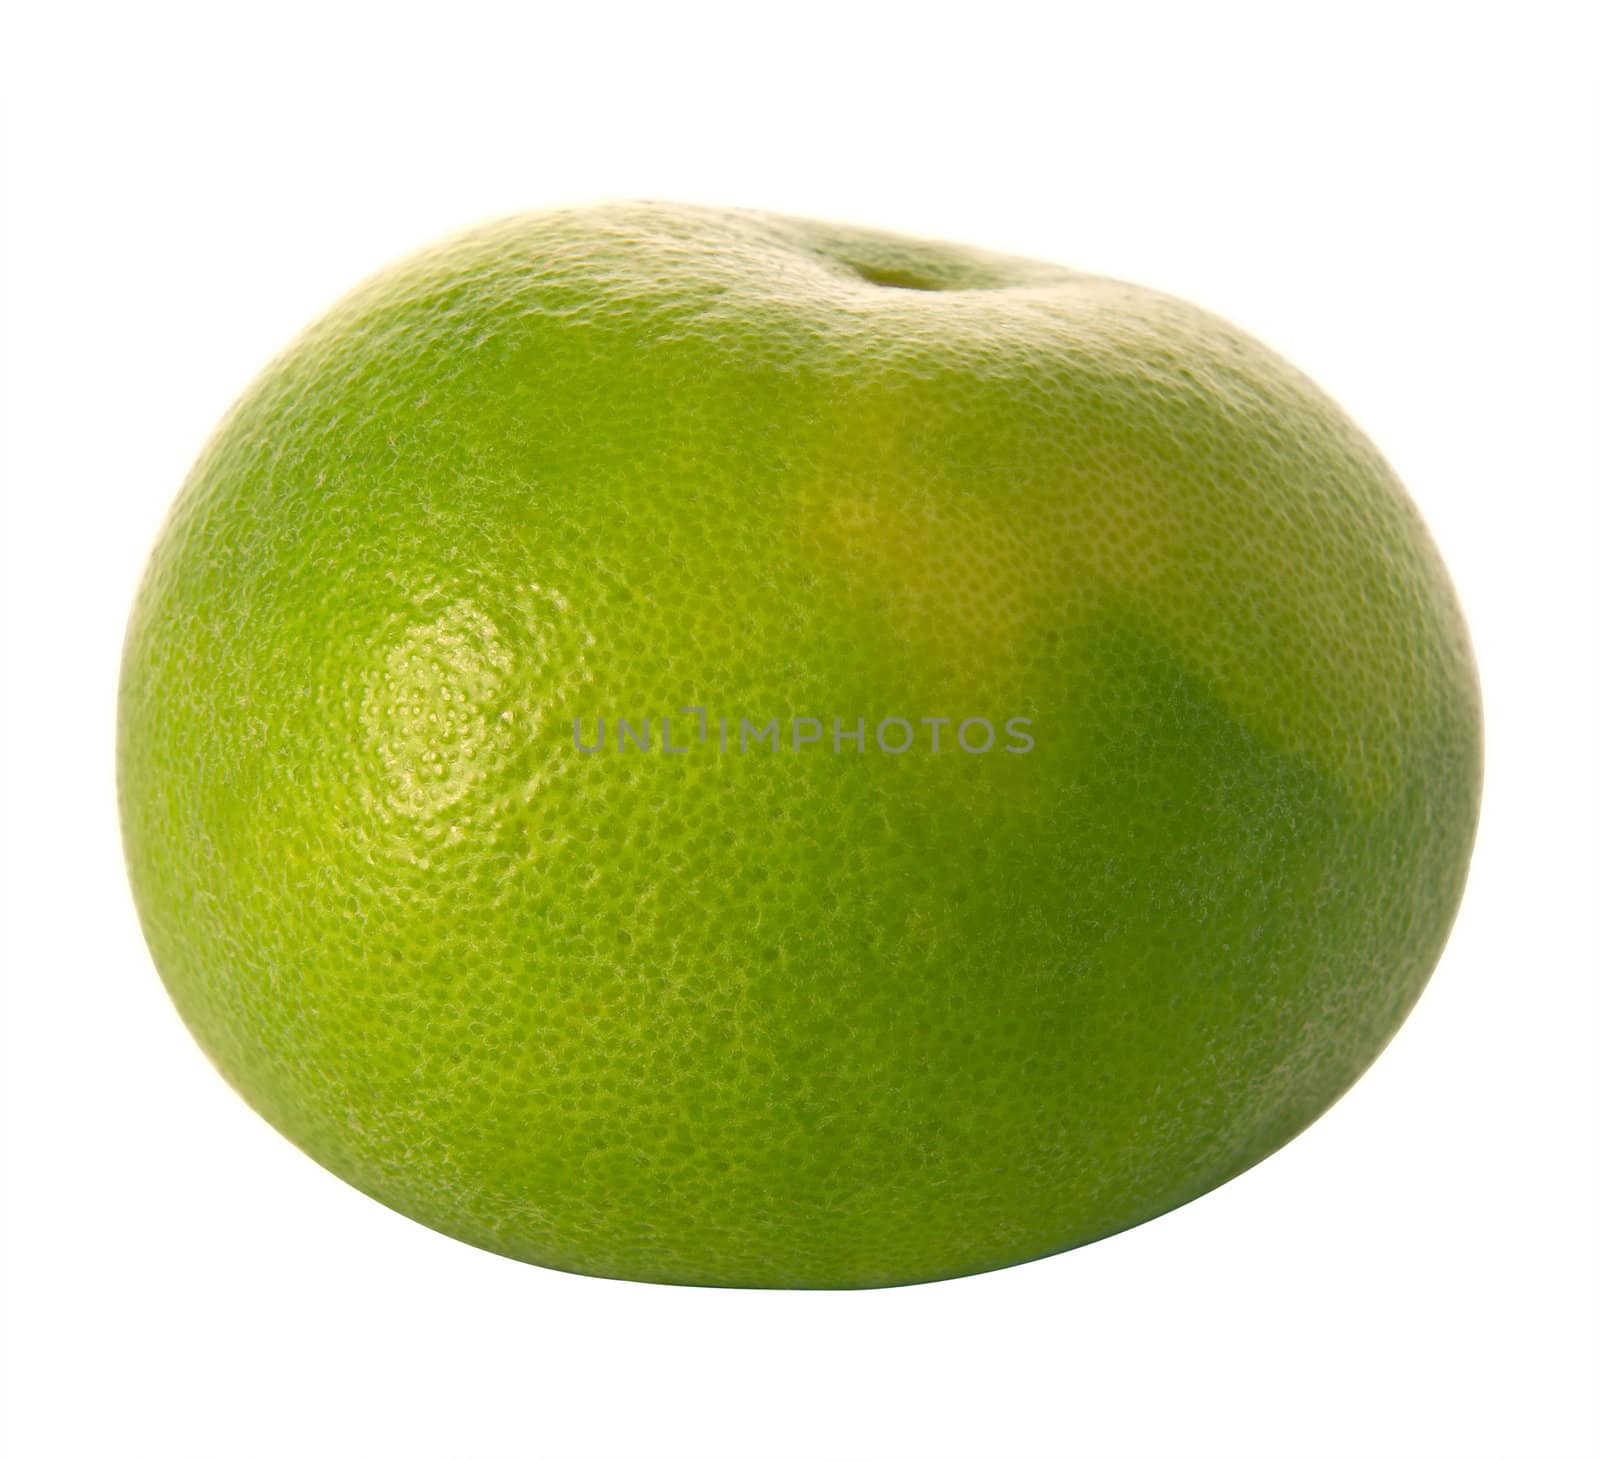 citrus - sweetie on a white background (isolated object)